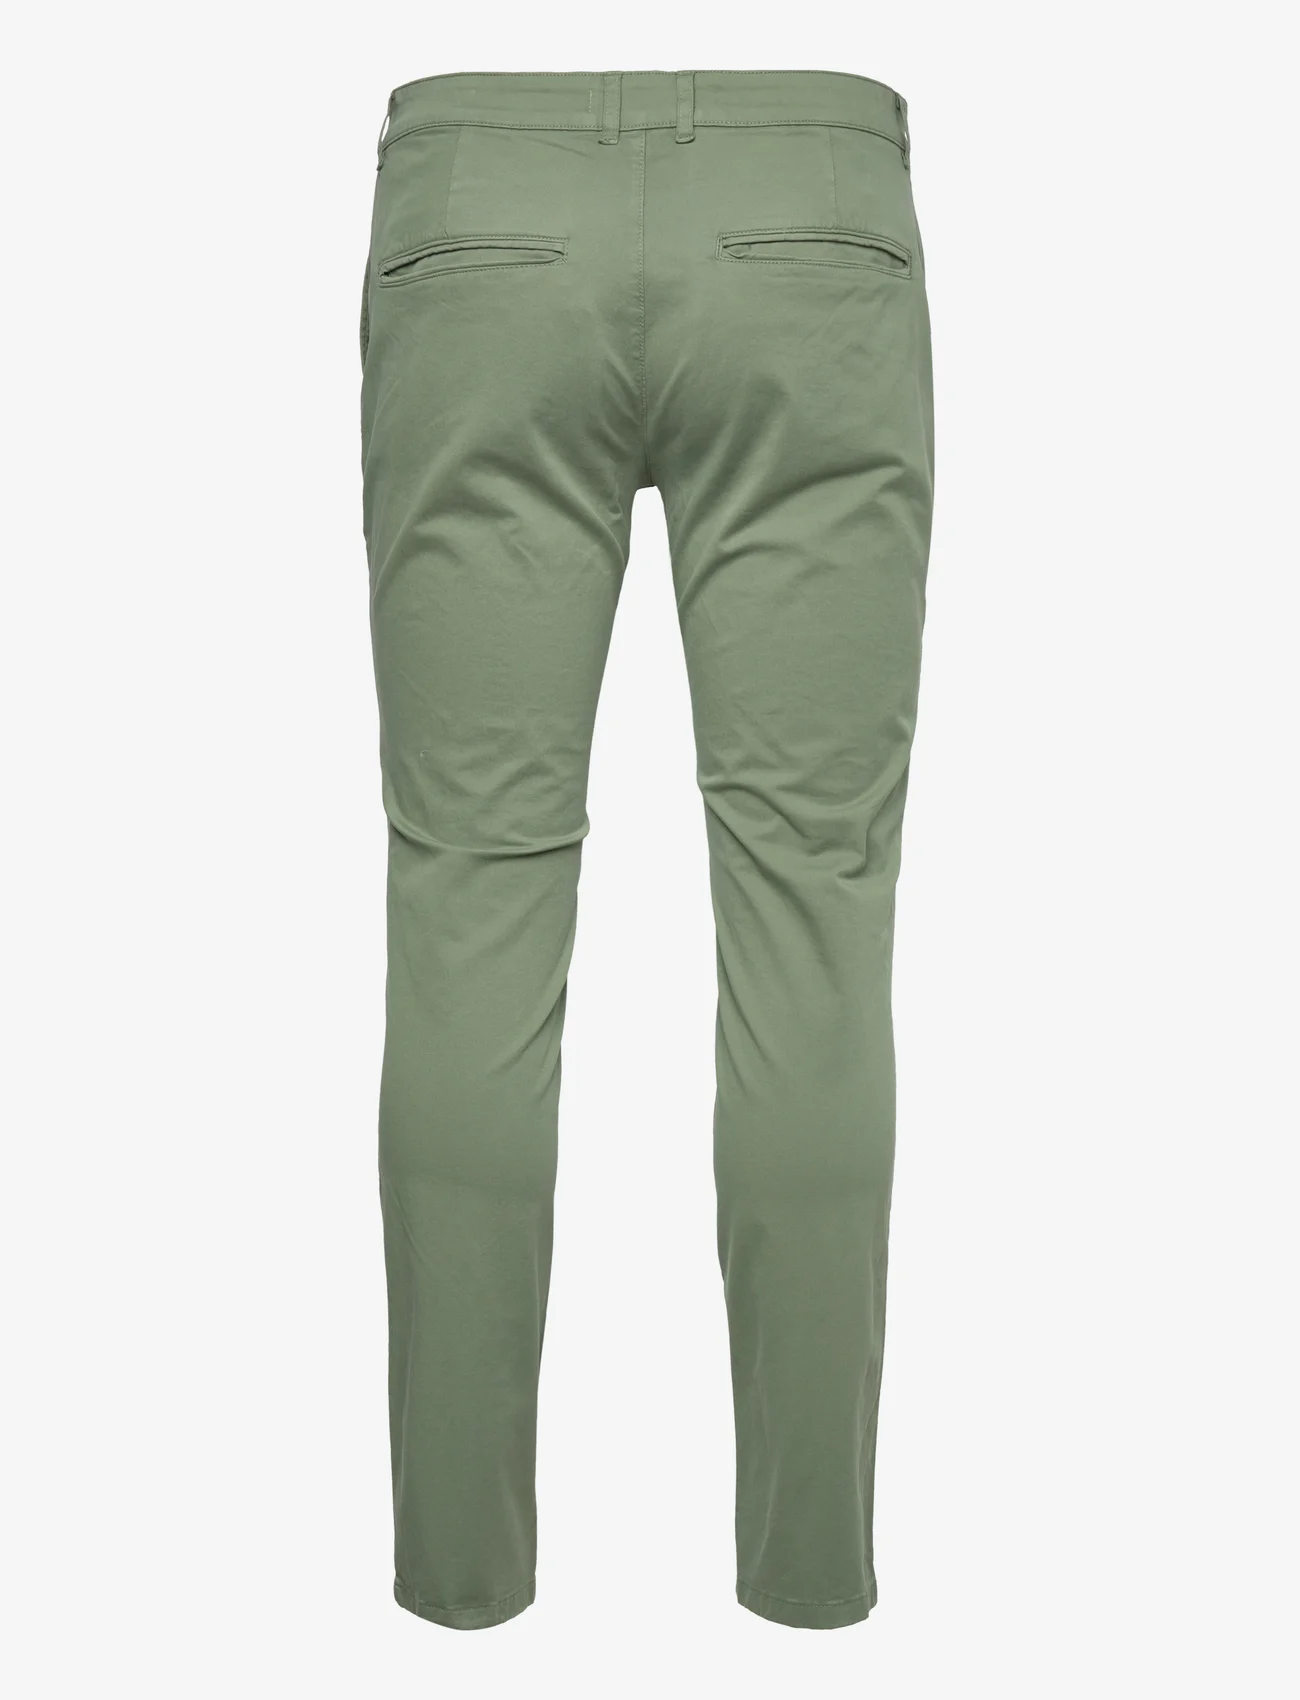 By Garment Makers - The Organic Chino Pants - chinos - dusty olive - 1